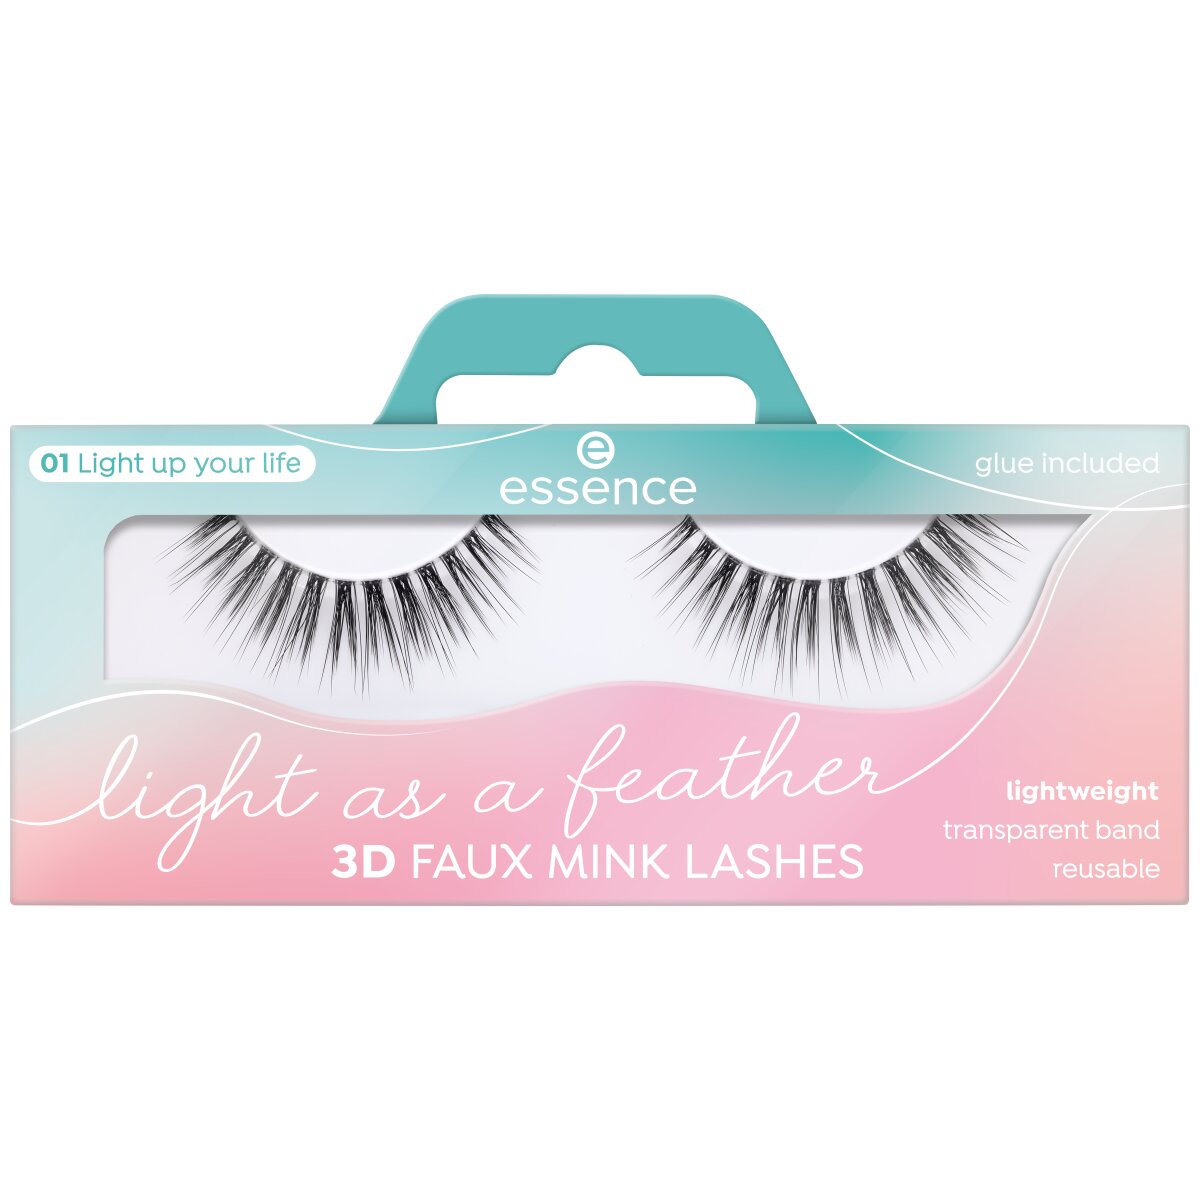 Faux Cosmetics House A Light Feather Lashes Mink of As – essence 3D